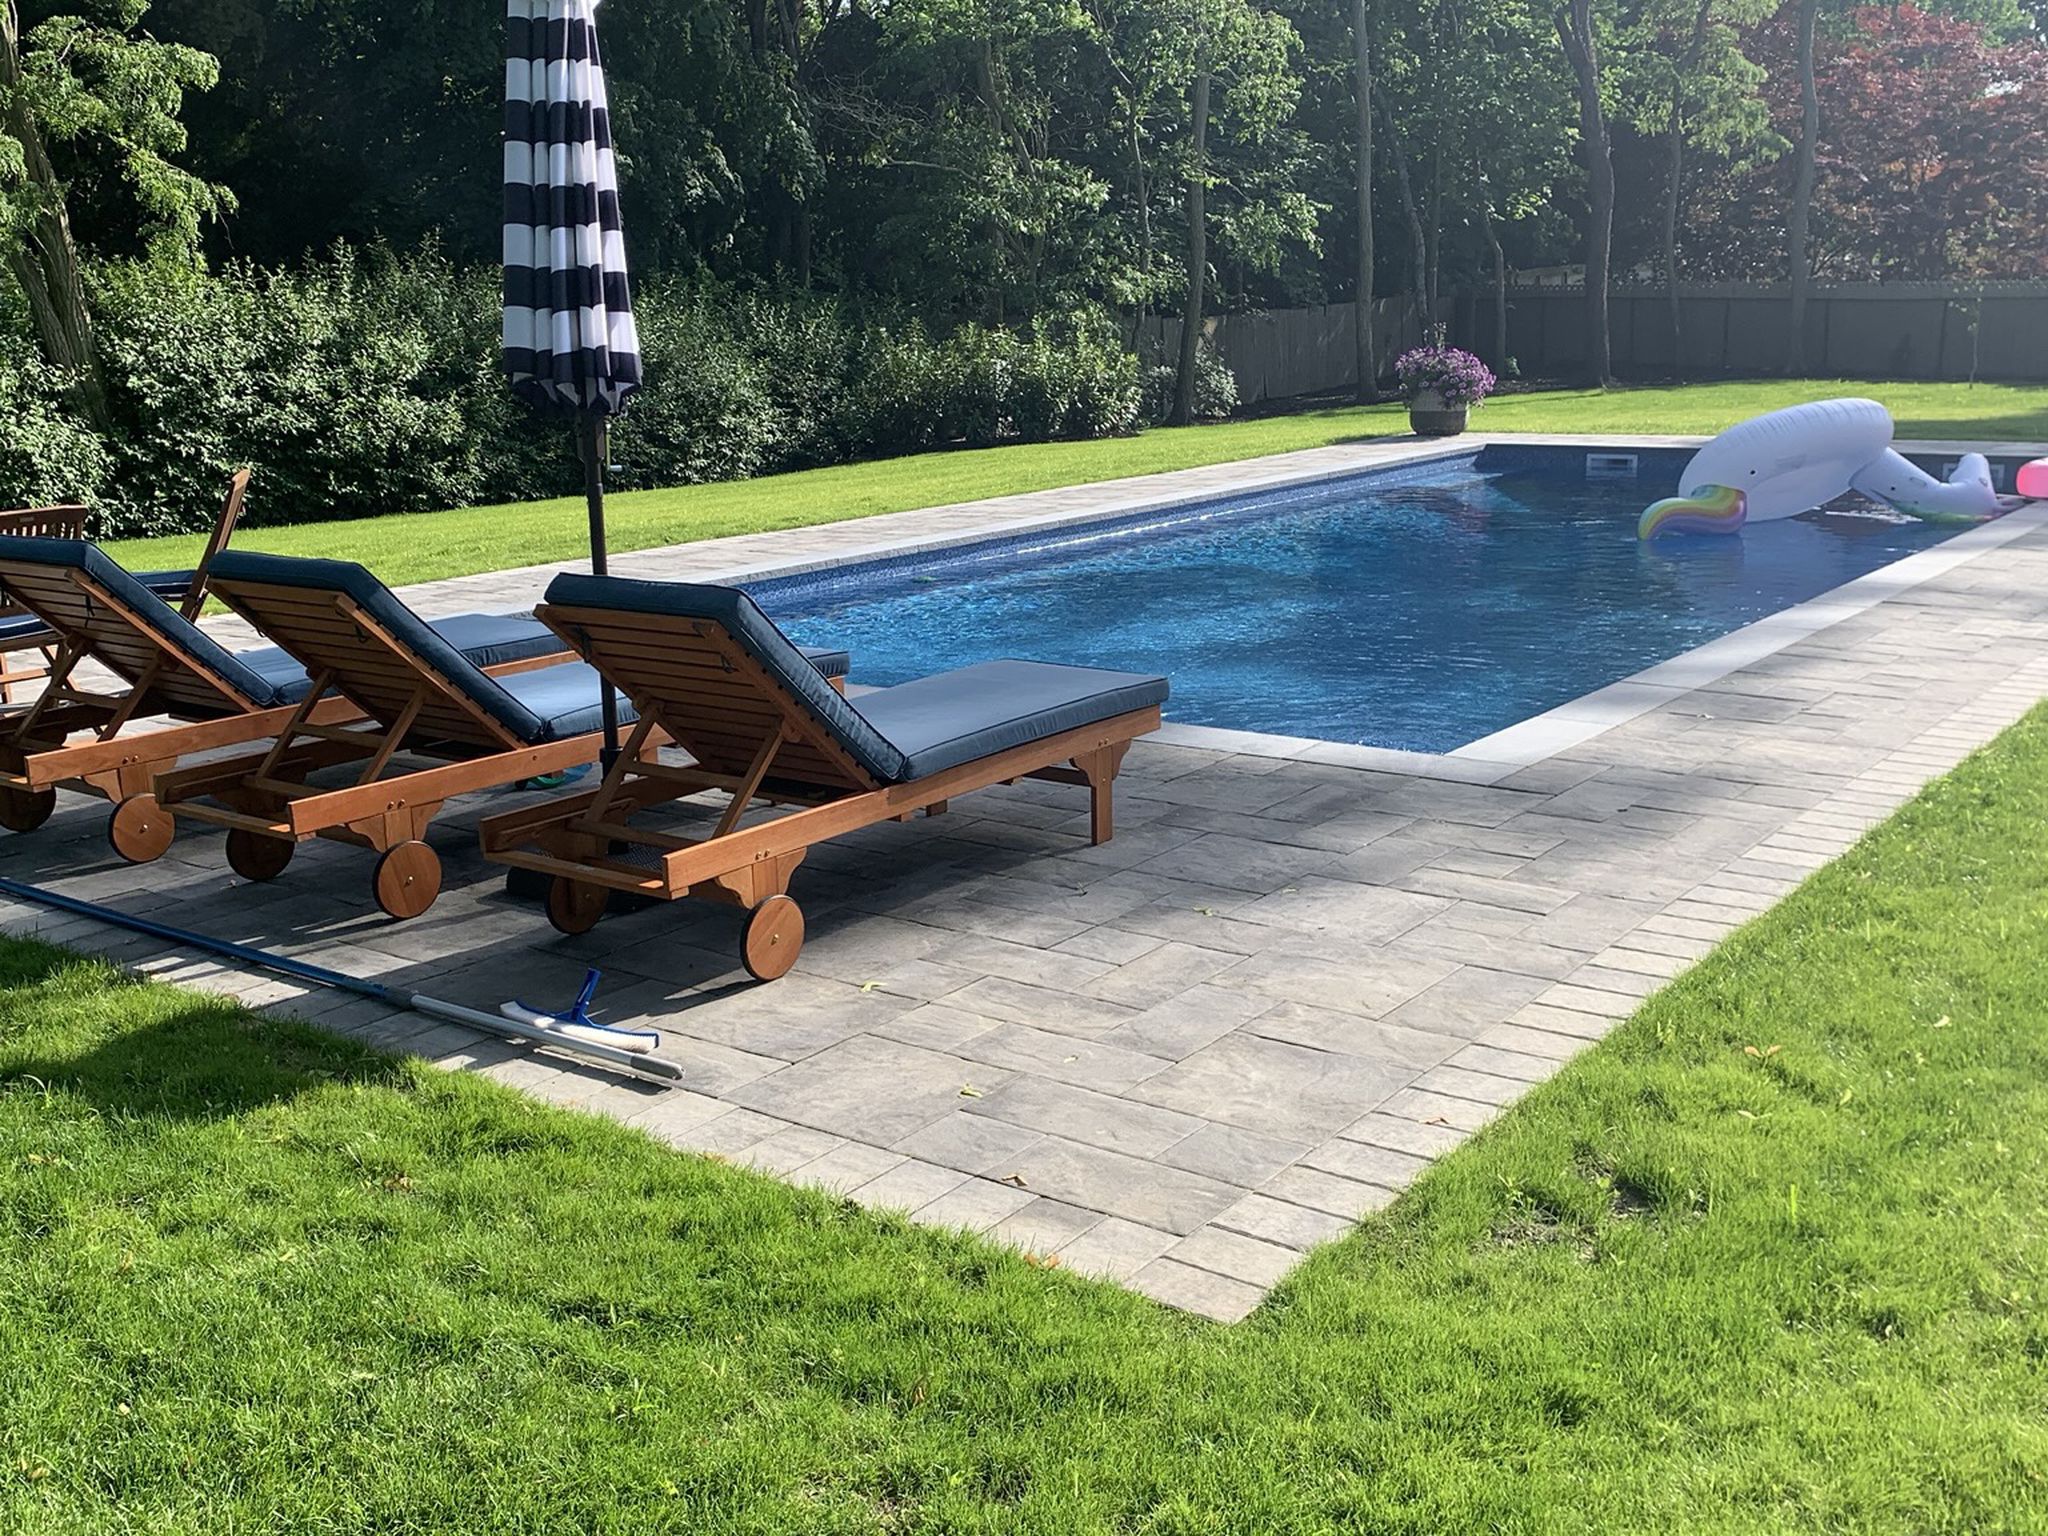 I can show you many pool designs and you decide which one you like